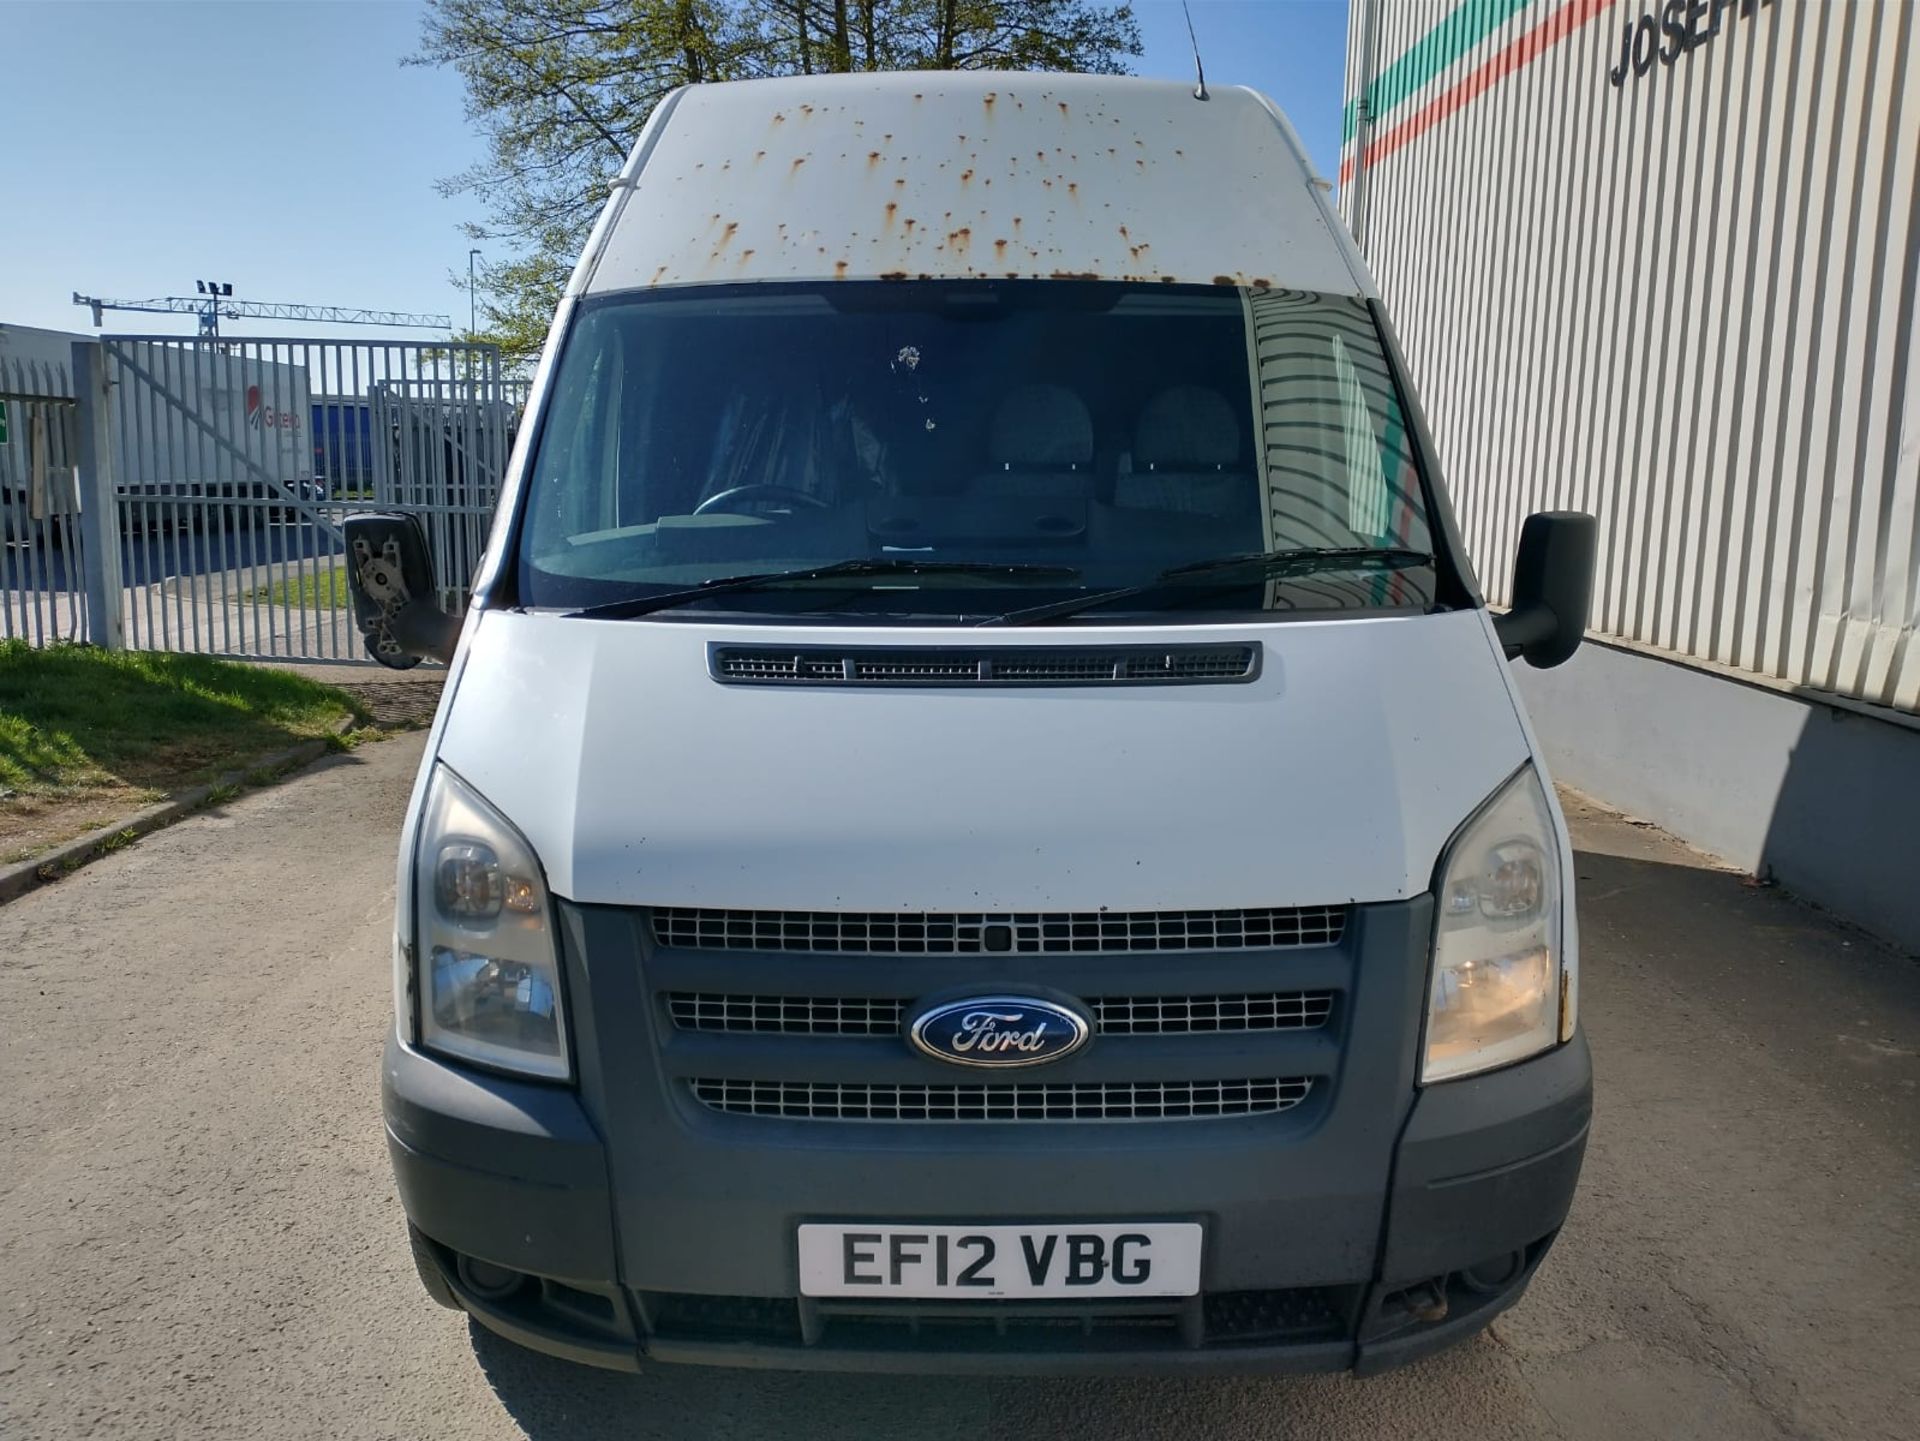 2012 Ford Transit Panel Van 2.2 5dr Medium Roof Panel Van - CL505 - Location: Corby - Image 12 of 13